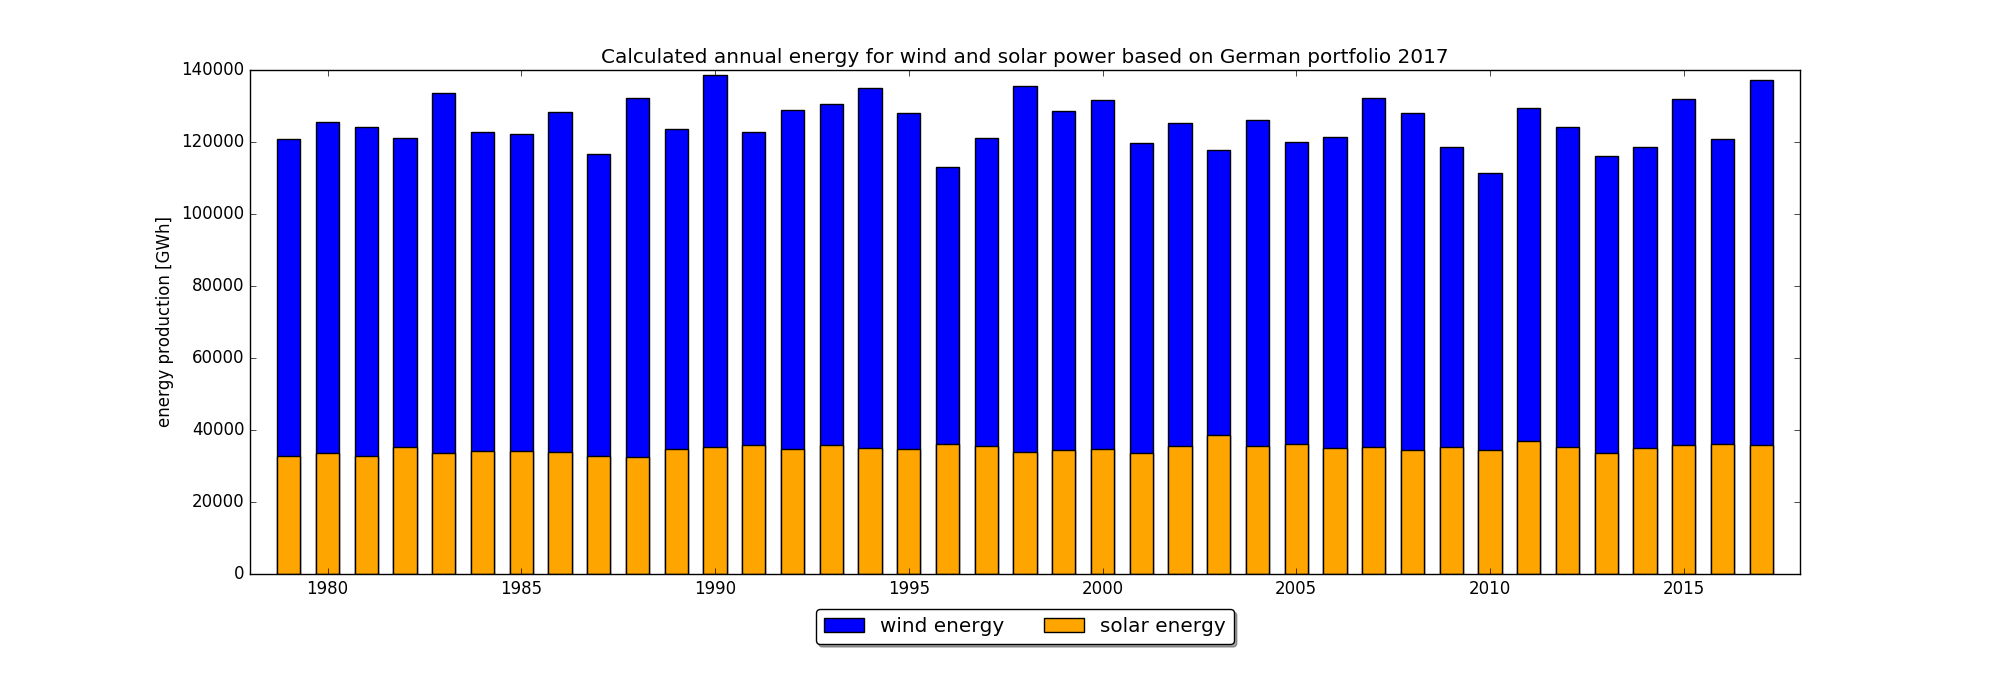 Annual energy for wind and solar power based on German portfolio 2017